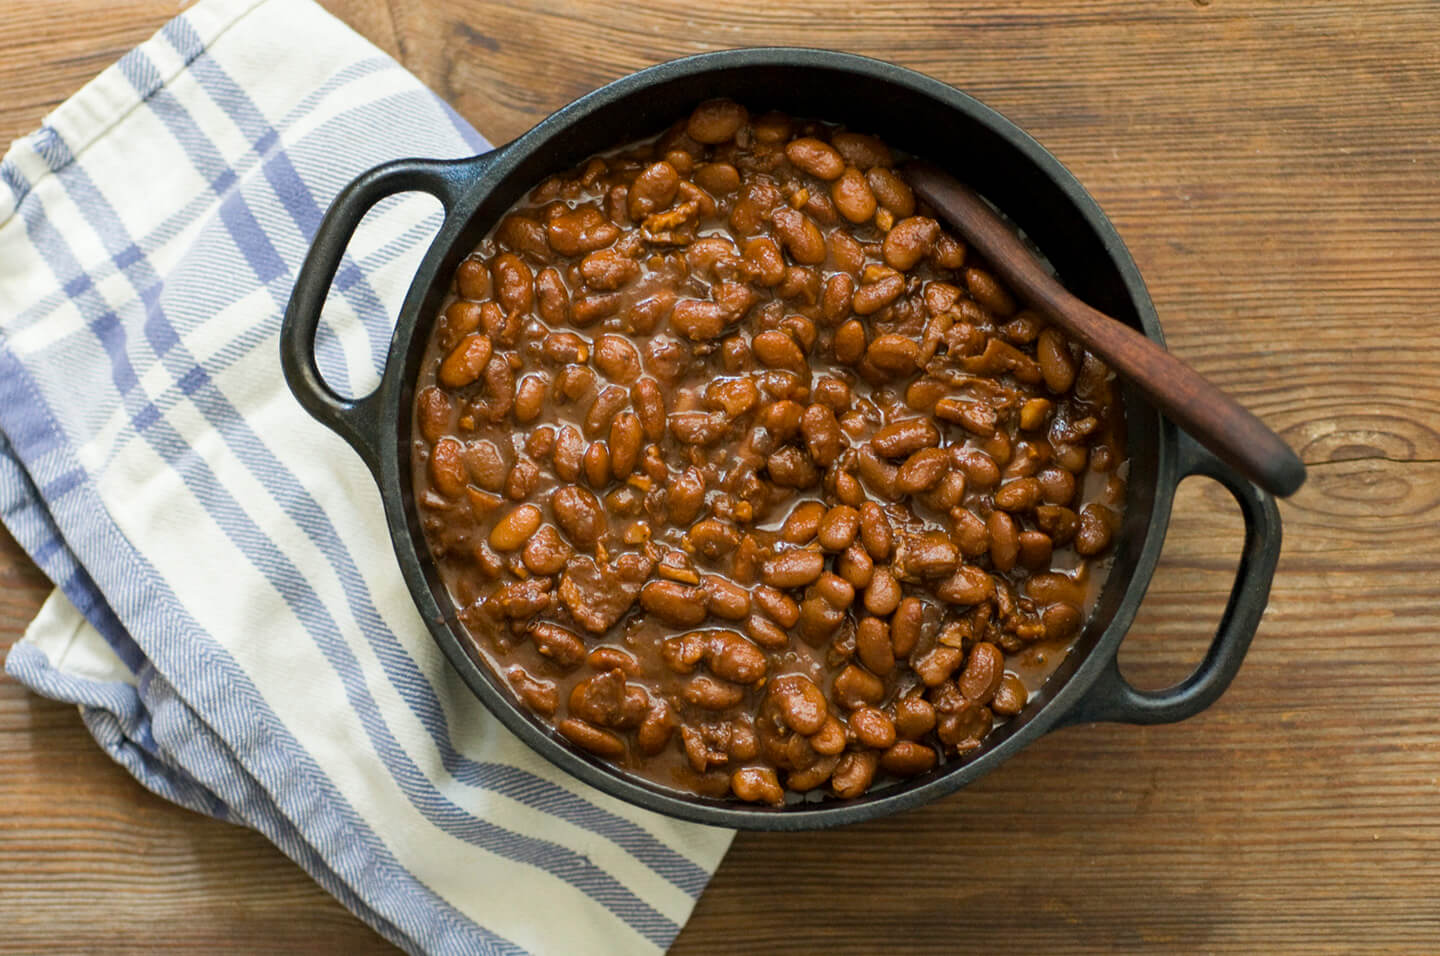 Dr Pepper barbecue beans DSC2014